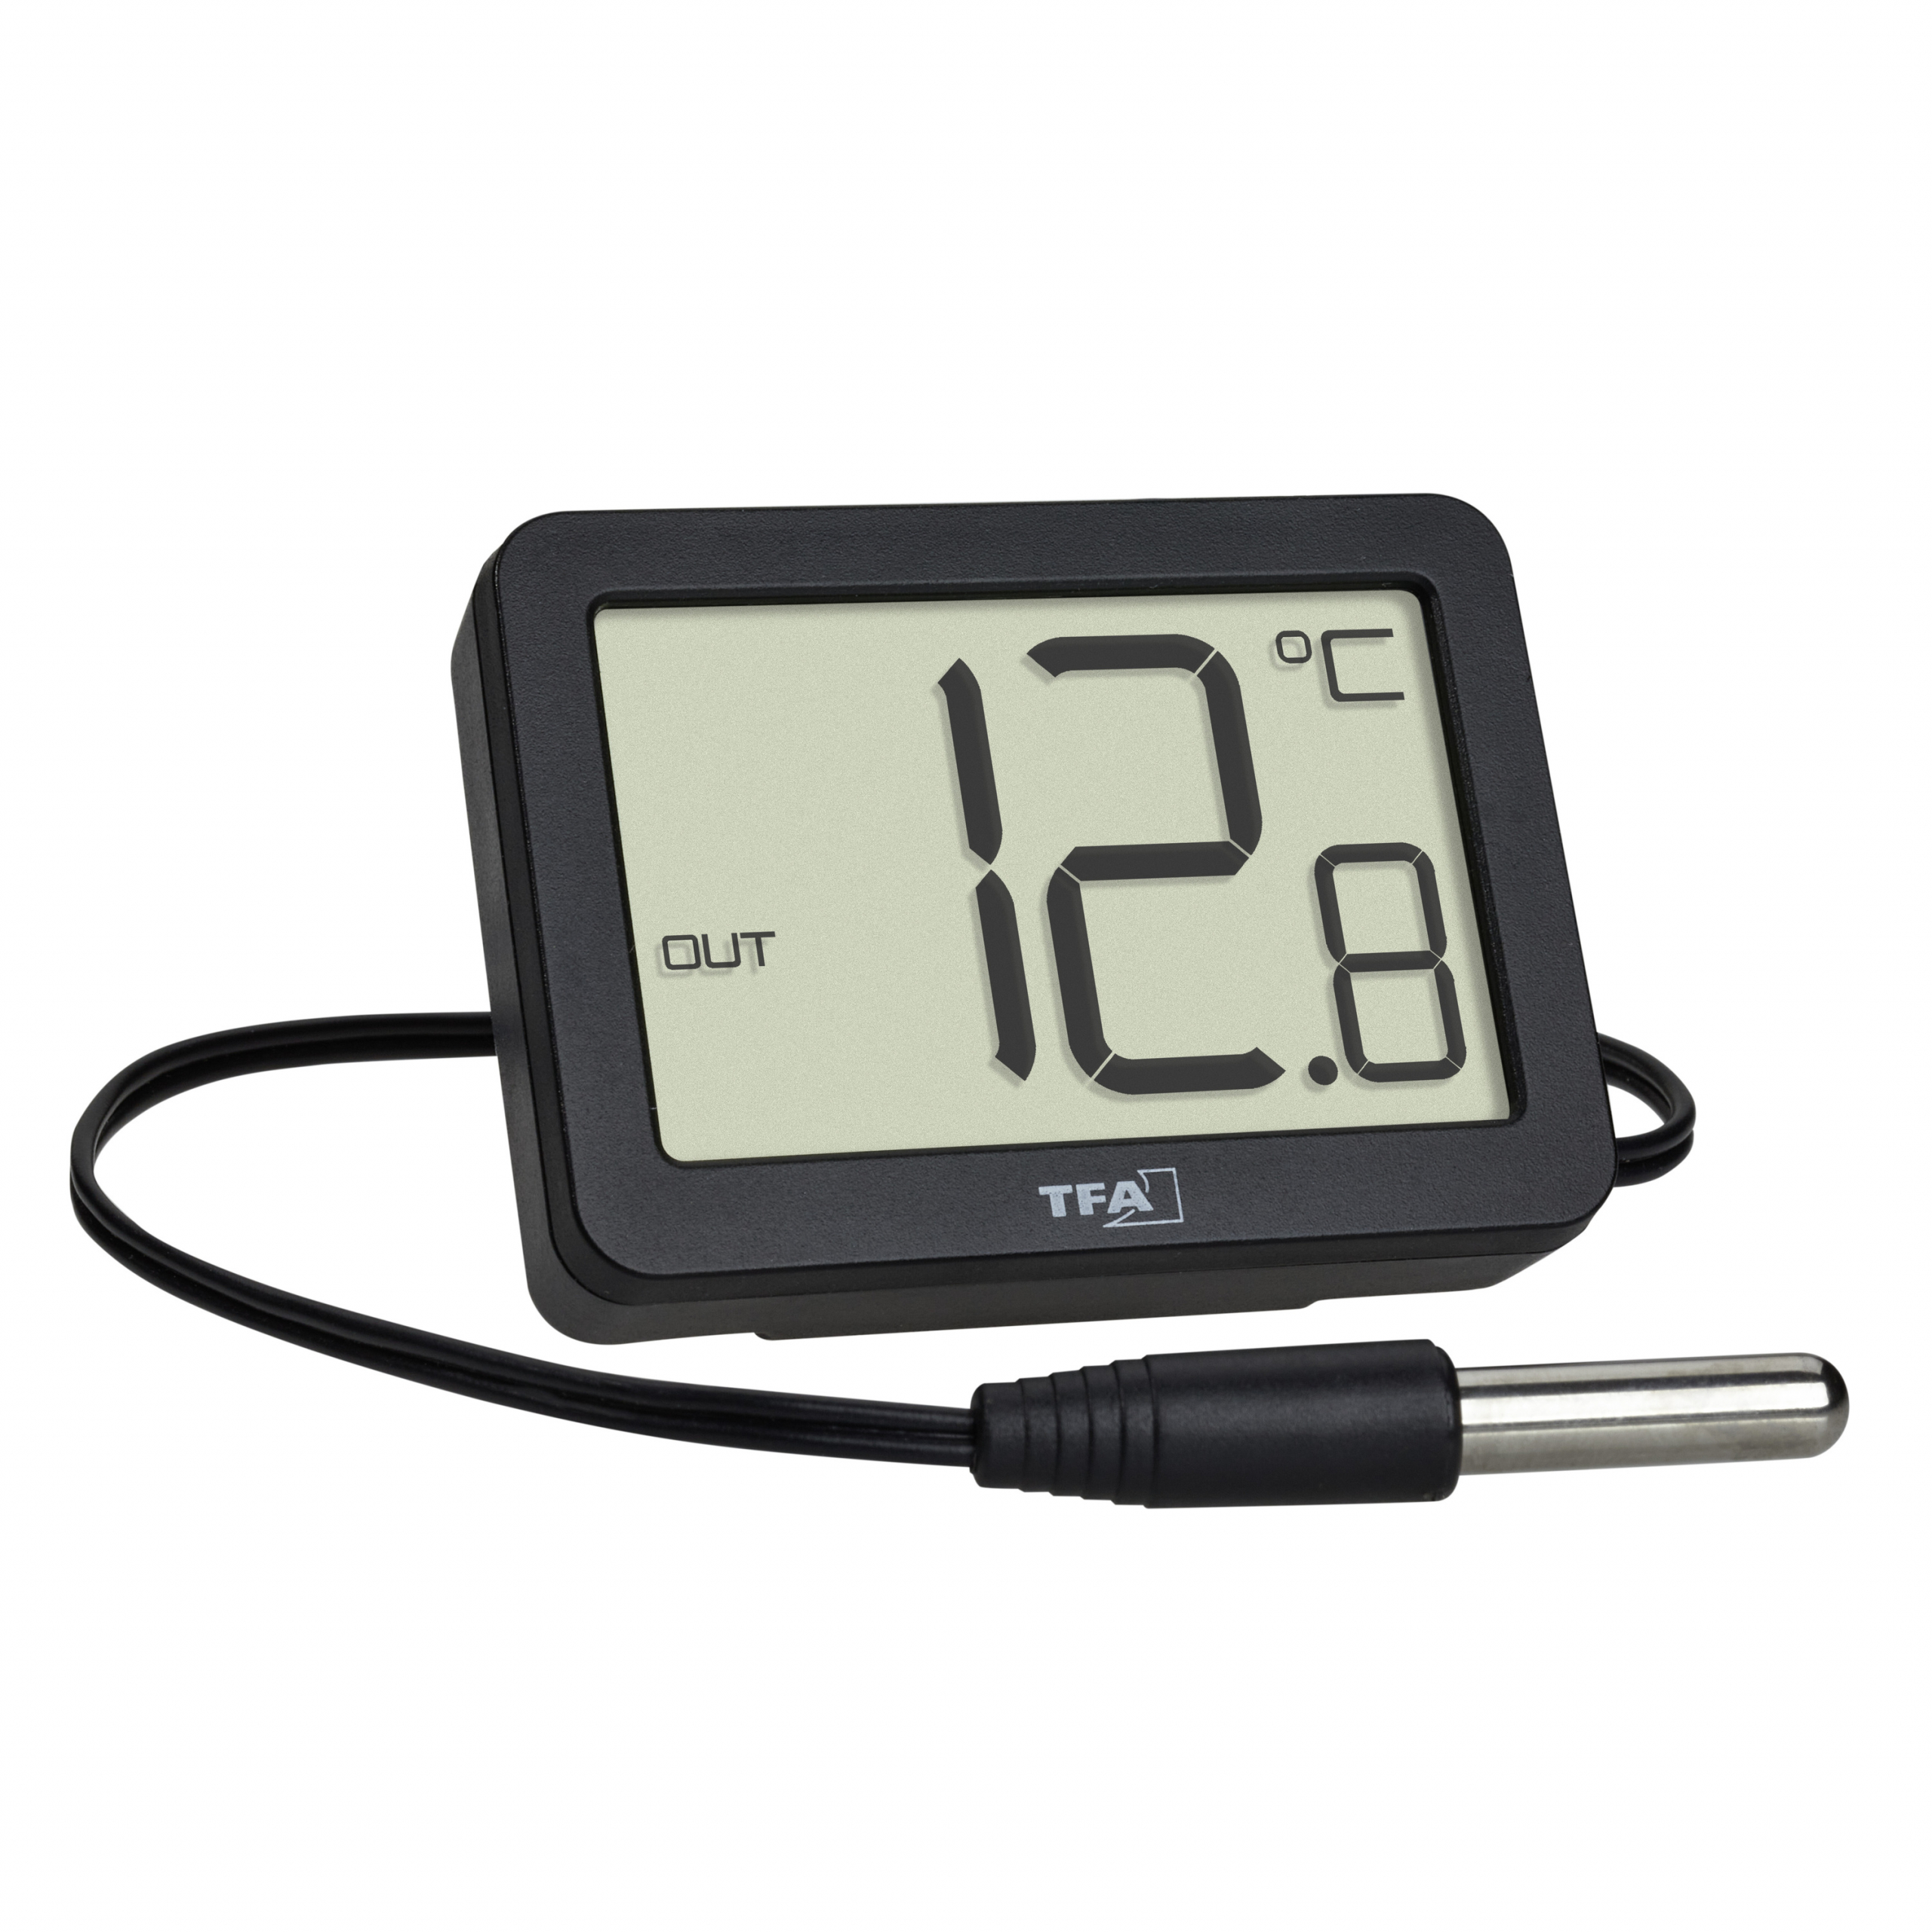 Digital Thermometer with Indoor/Outdoor Temperature and Time